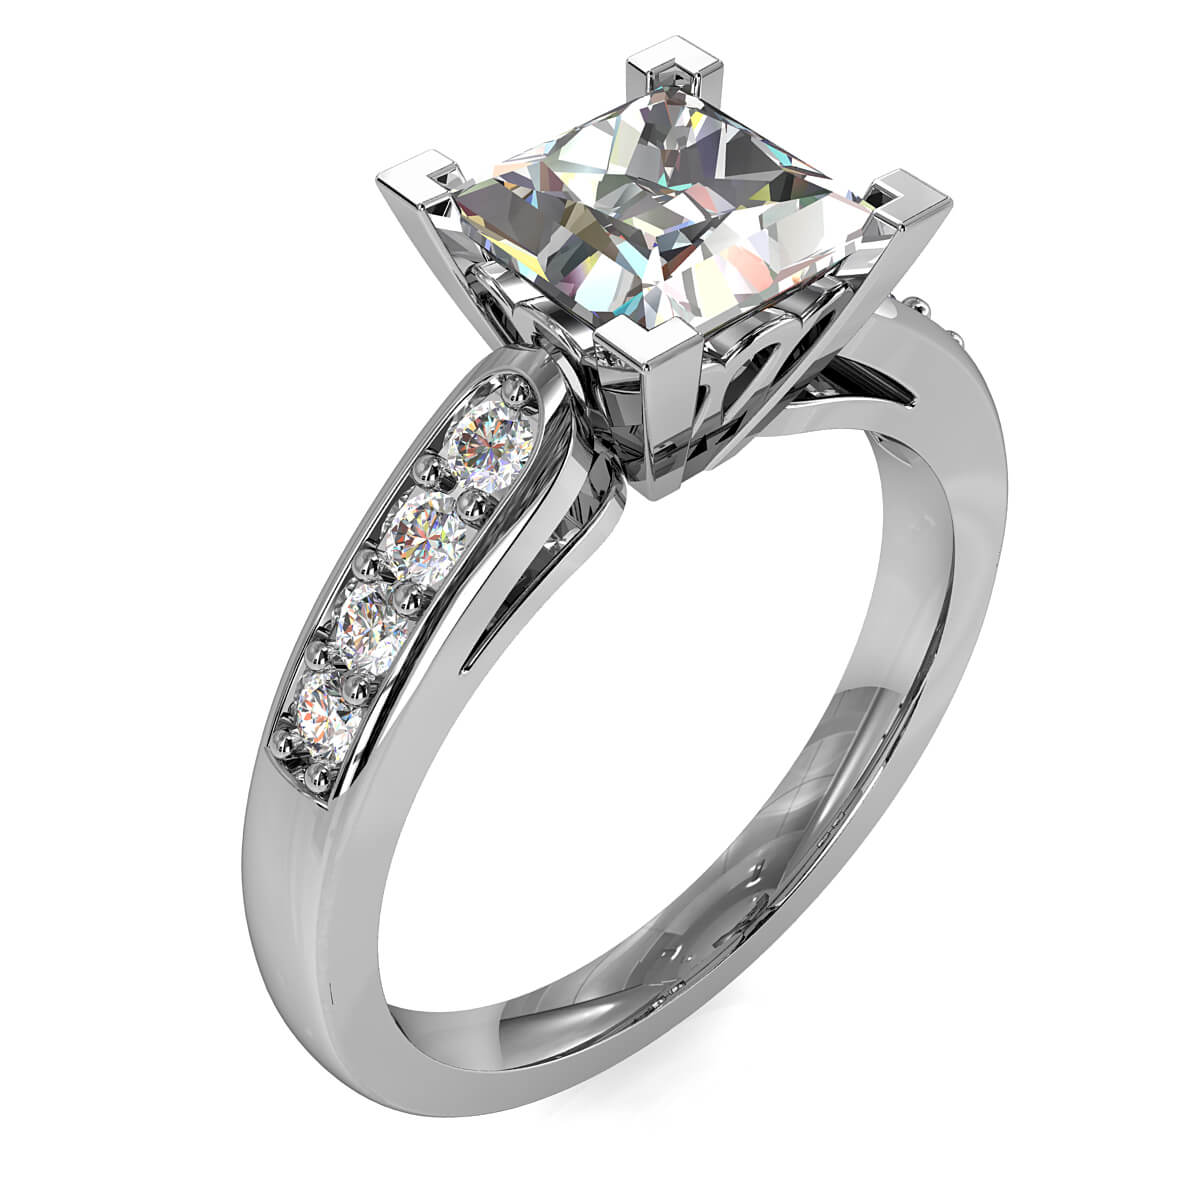 Princess Cut Solitaire Diamond Engagement Ring, 4 Corner Claws on a Bead Set Band with Lotus Support Bar.